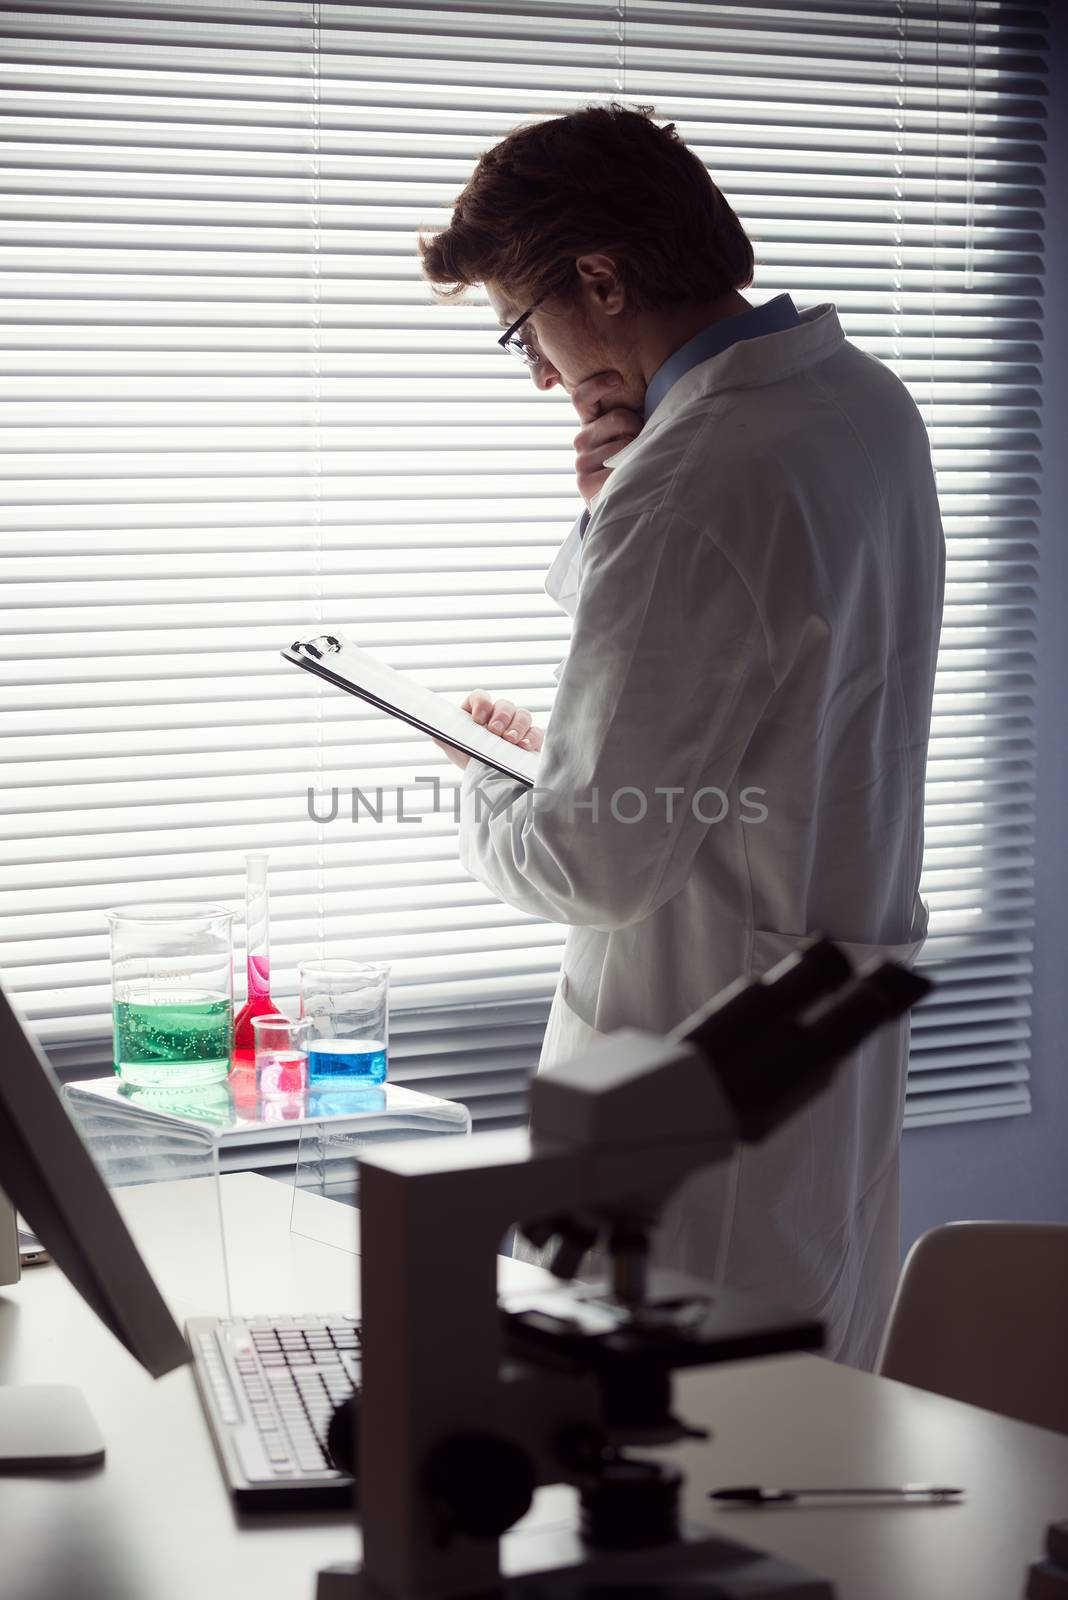 Researcher reading medical records in the chemical laboratory with microscope on foreground.